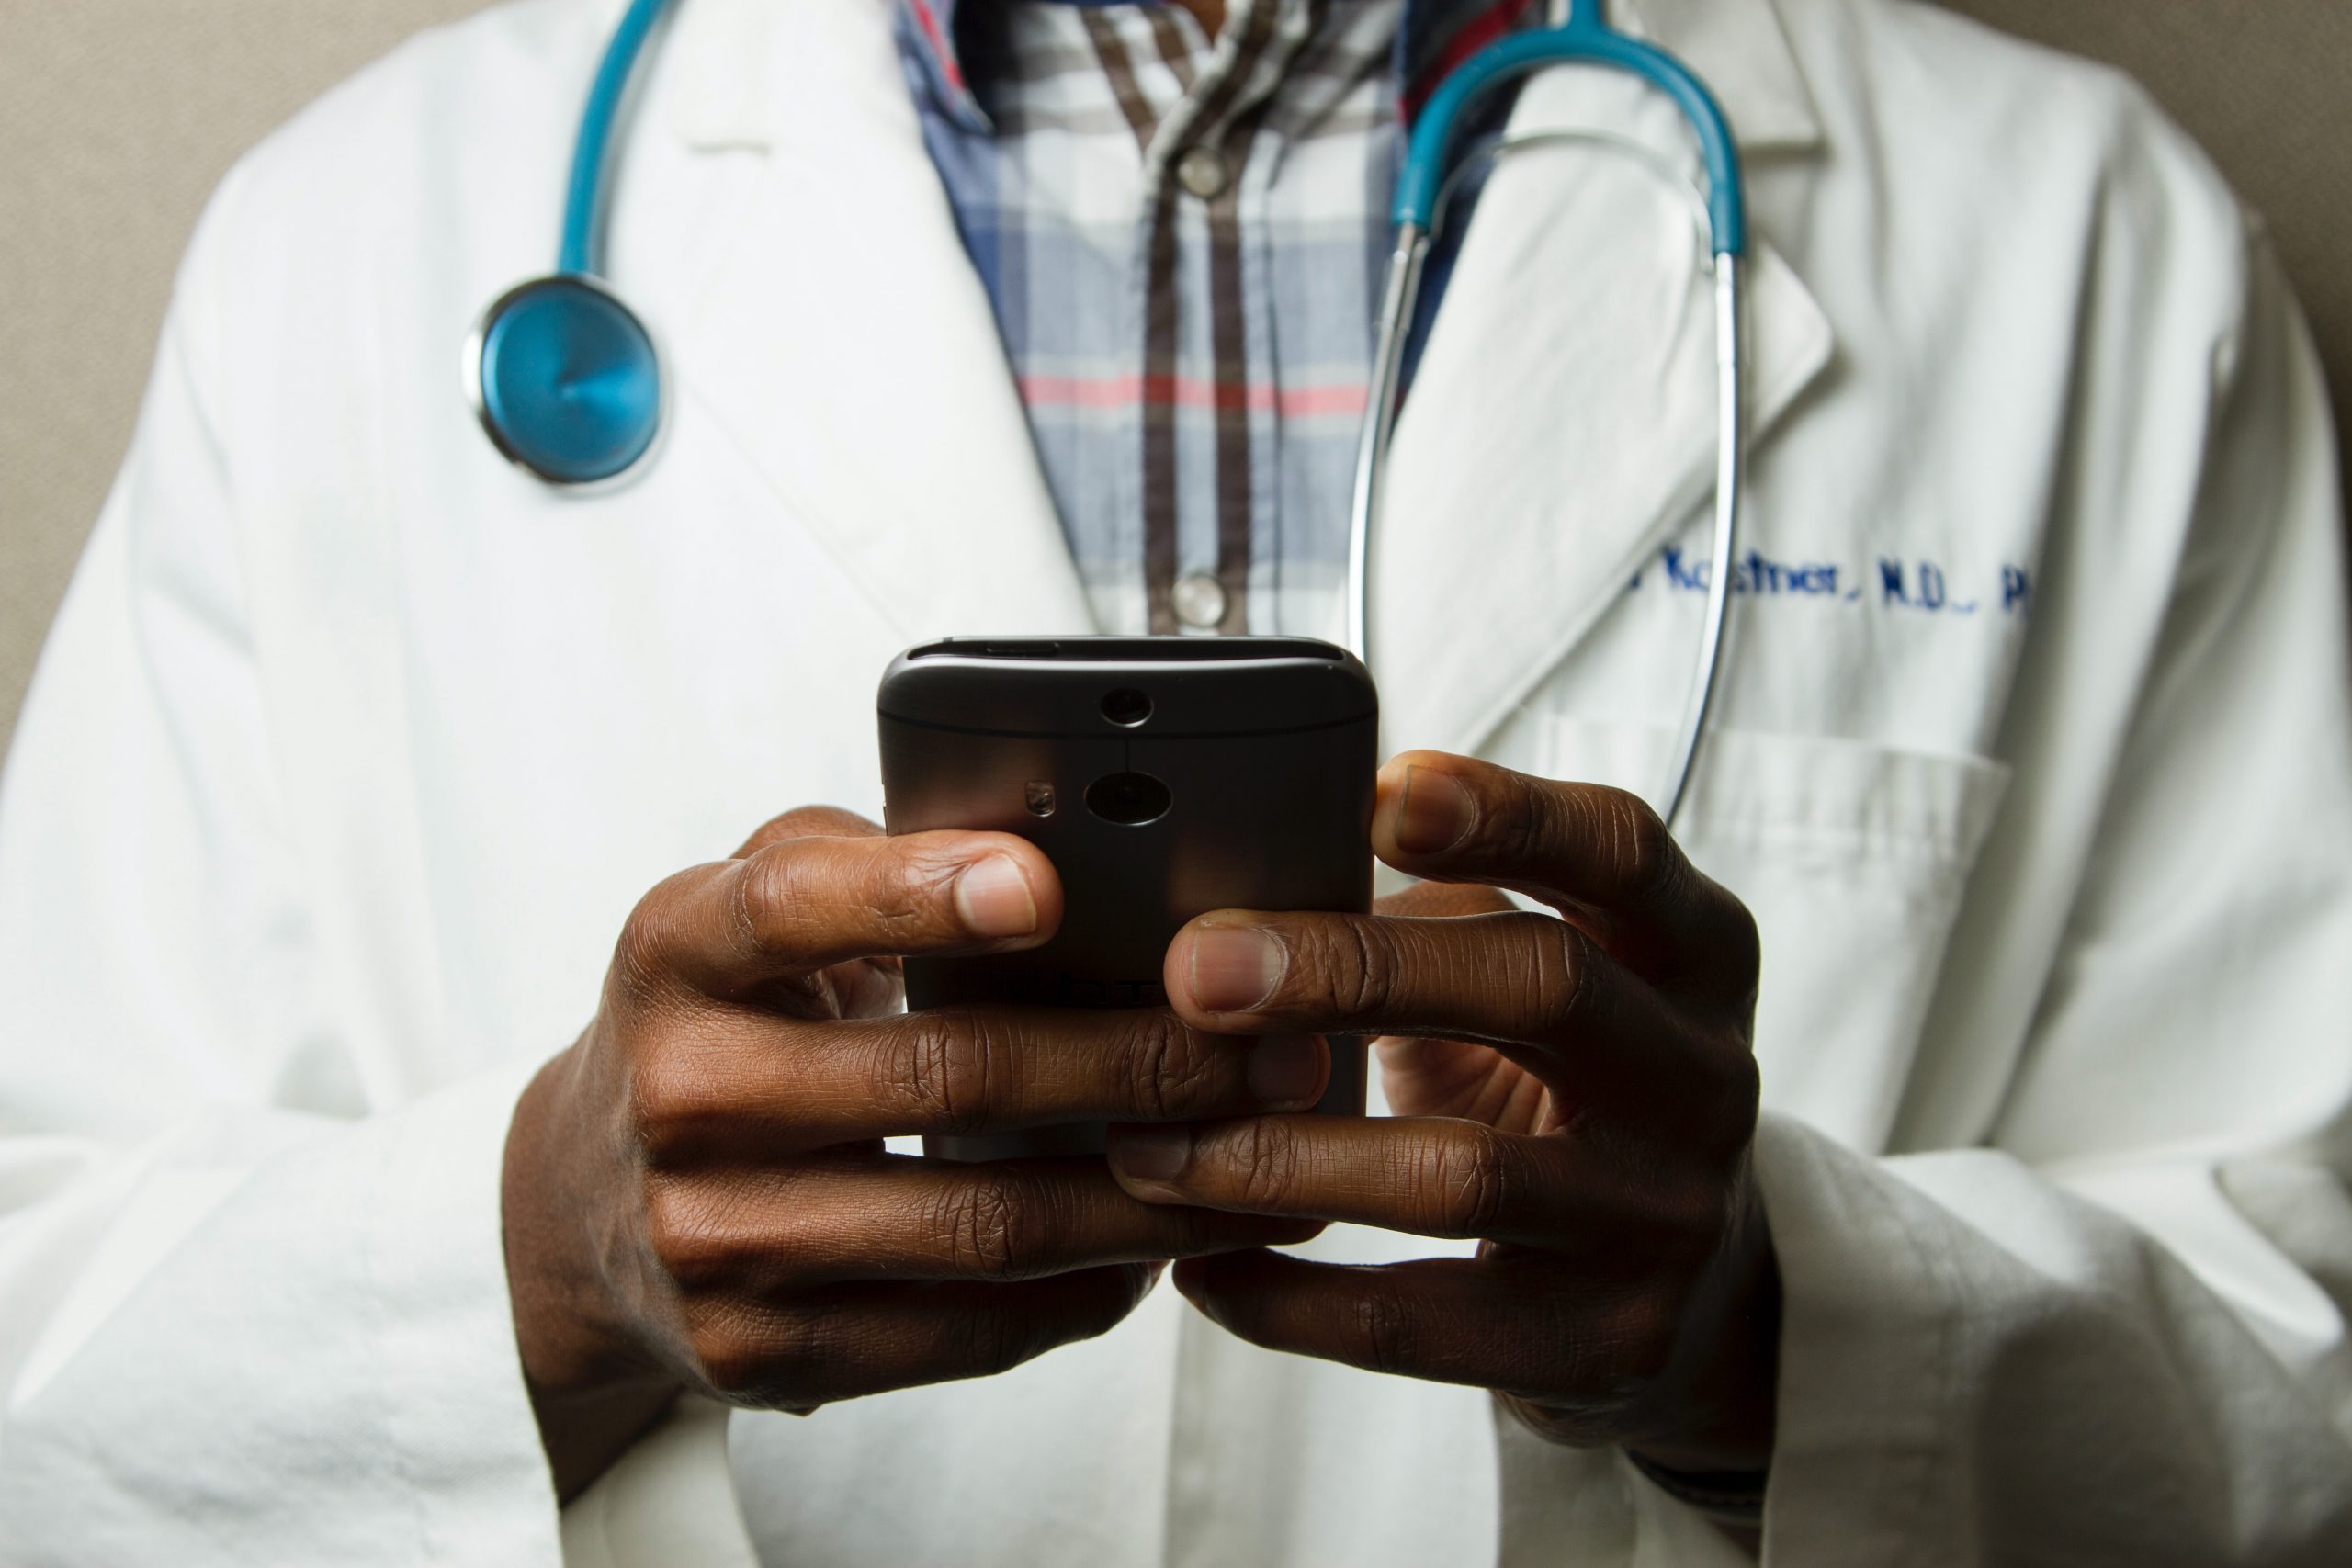 The photograph shows the chest and hands of a black doctor holding a mobile phone